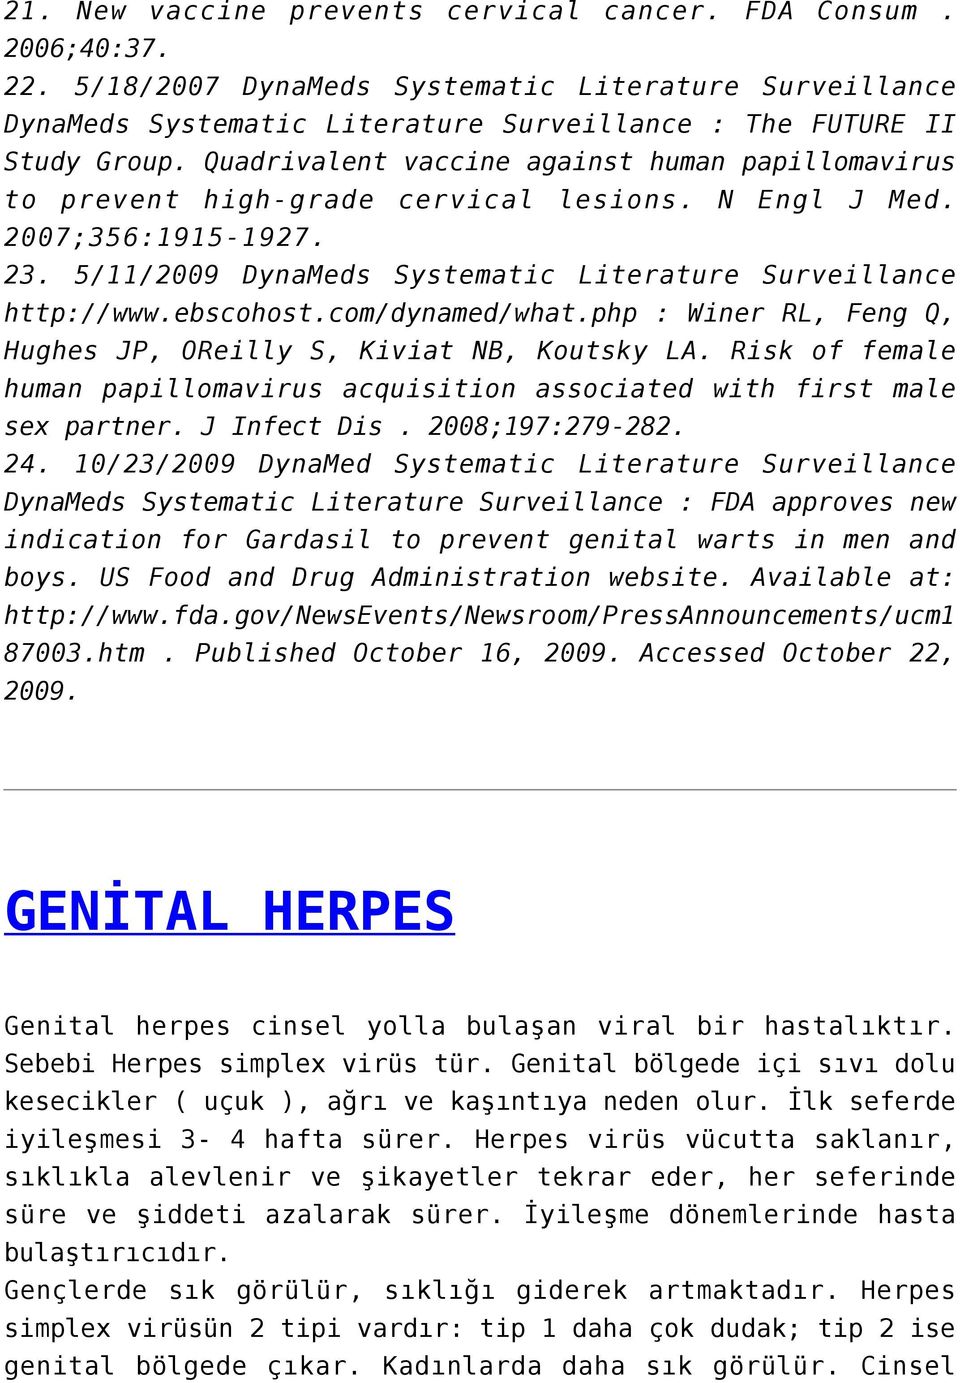 ebscohost.com/dynamed/what.php : Winer RL, Feng Q, Hughes JP, OReilly S, Kiviat NB, Koutsky LA. Risk of female human papillomavirus acquisition associated with first male sex partner. J Infect Dis.